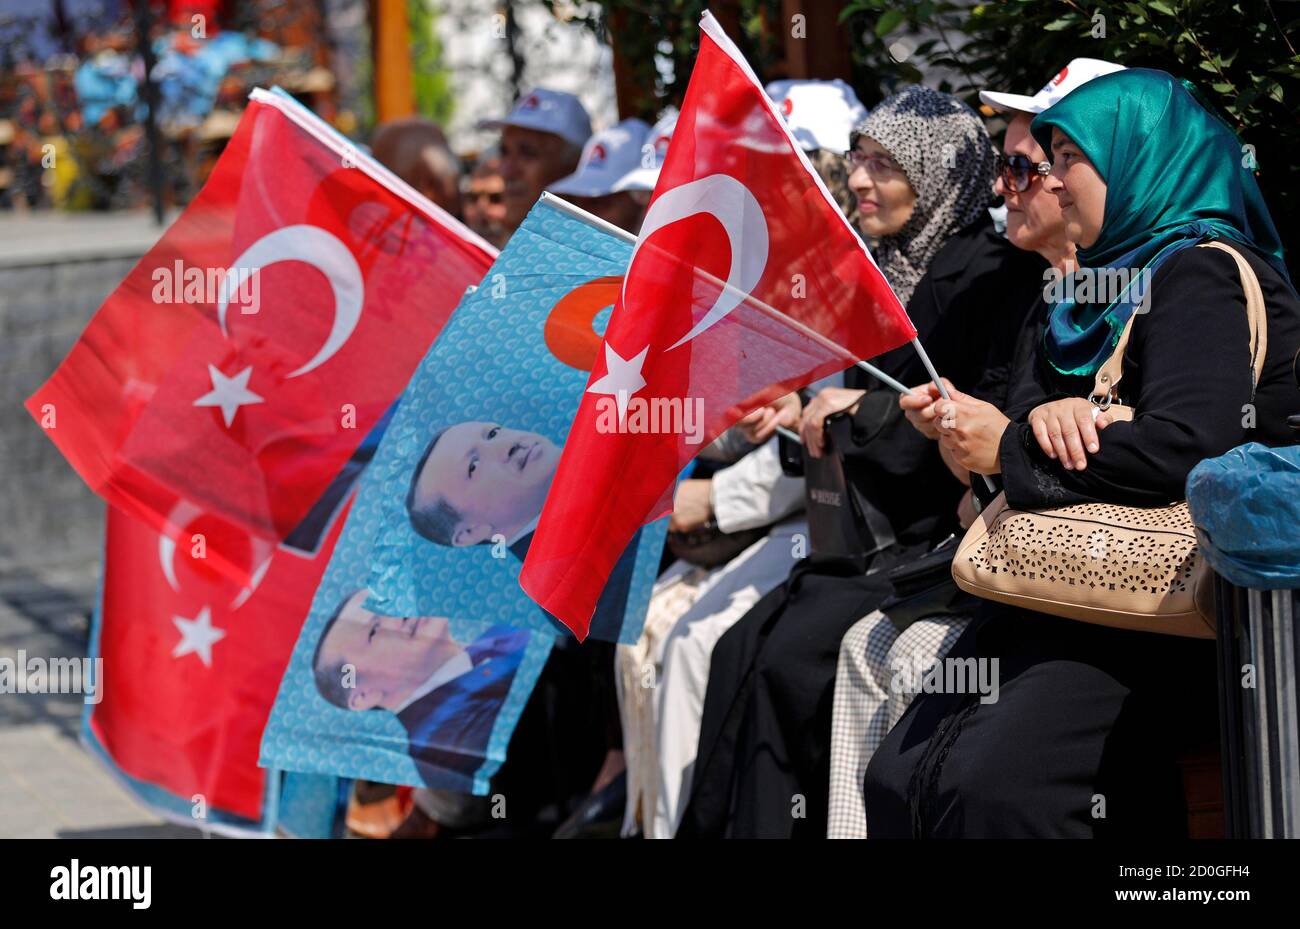 Supporters attend a gathering in support of Turkey's Prime Minister and presidential candidate Tayyip Erdogan in Istanbul August 8, 2014. Erdogan is set to secure his place in history as Turkey's first popularly-elected president on Sunday, but his tightening grip on power has polarised the nation, worried Western allies and raised fears of creeping authoritarianism. REUTERS/Murad Sezer (TURKEY  - Tags: POLITICS ELECTIONS) Stock Photo